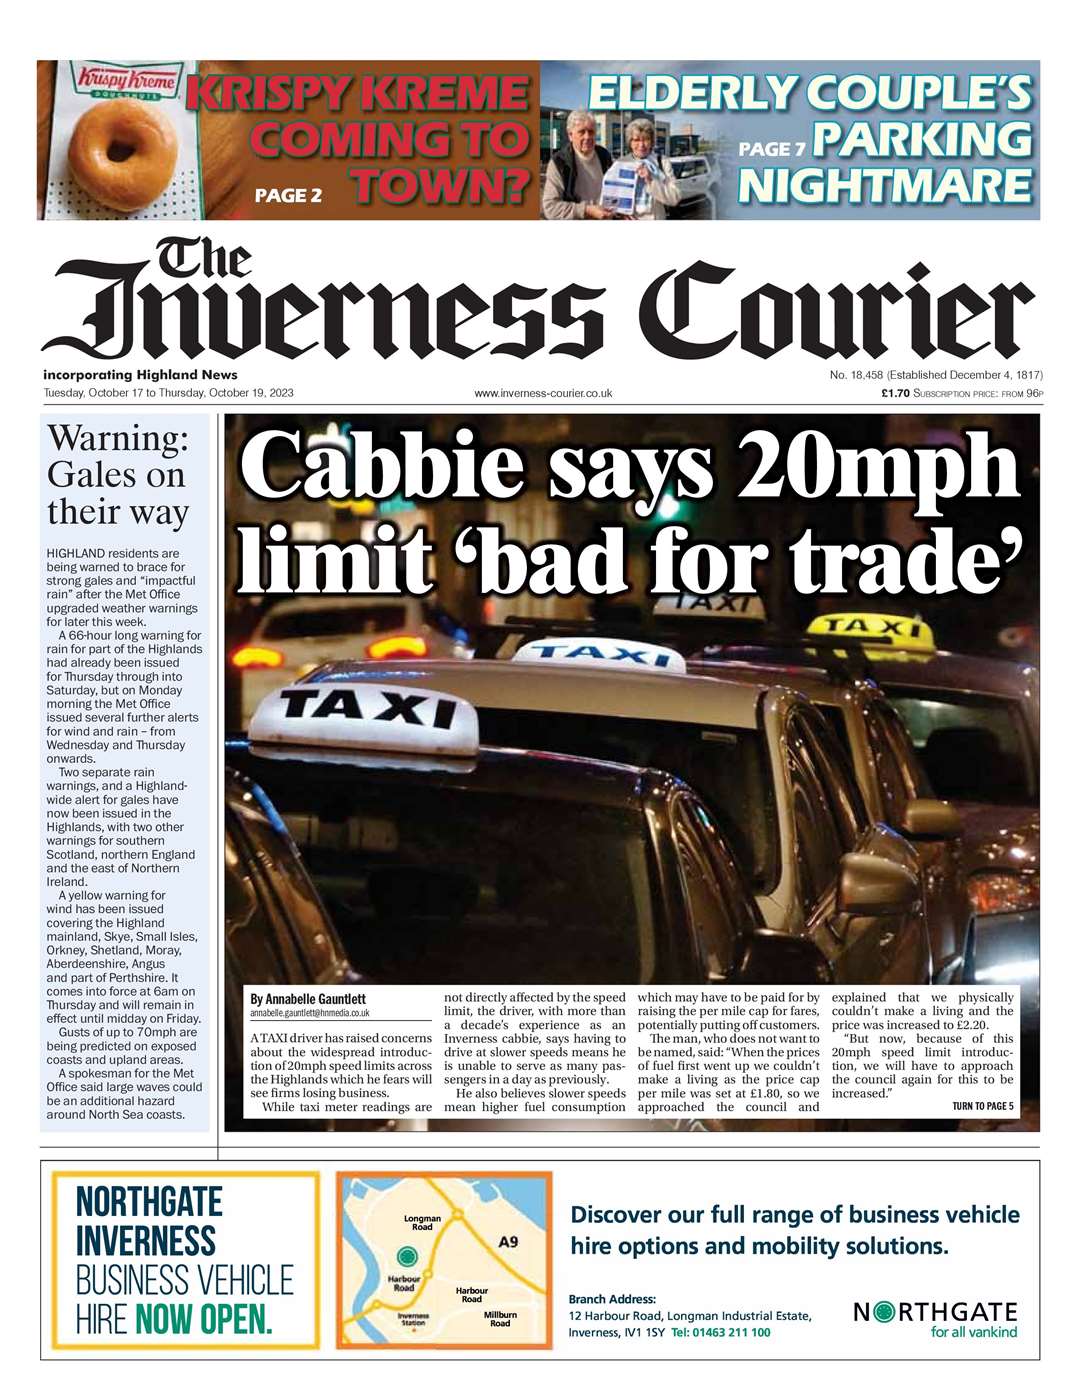 The Inverness Courier, October 17, front page.